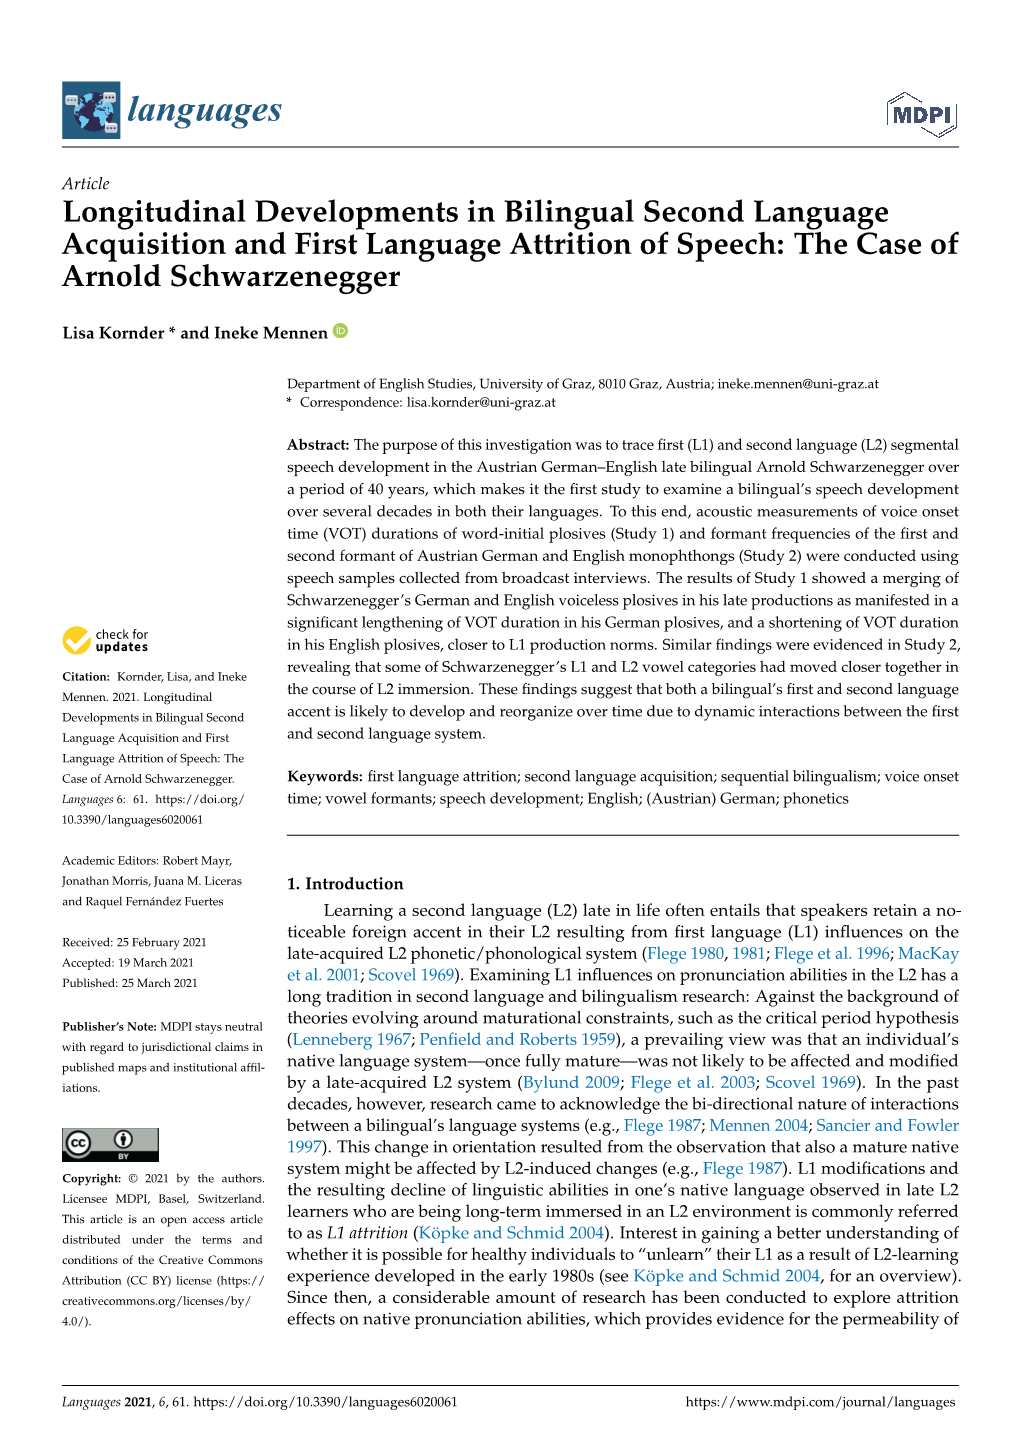 Longitudinal Developments in Bilingual Second Language Acquisition and First Language Attrition of Speech: the Case of Arnold Schwarzenegger